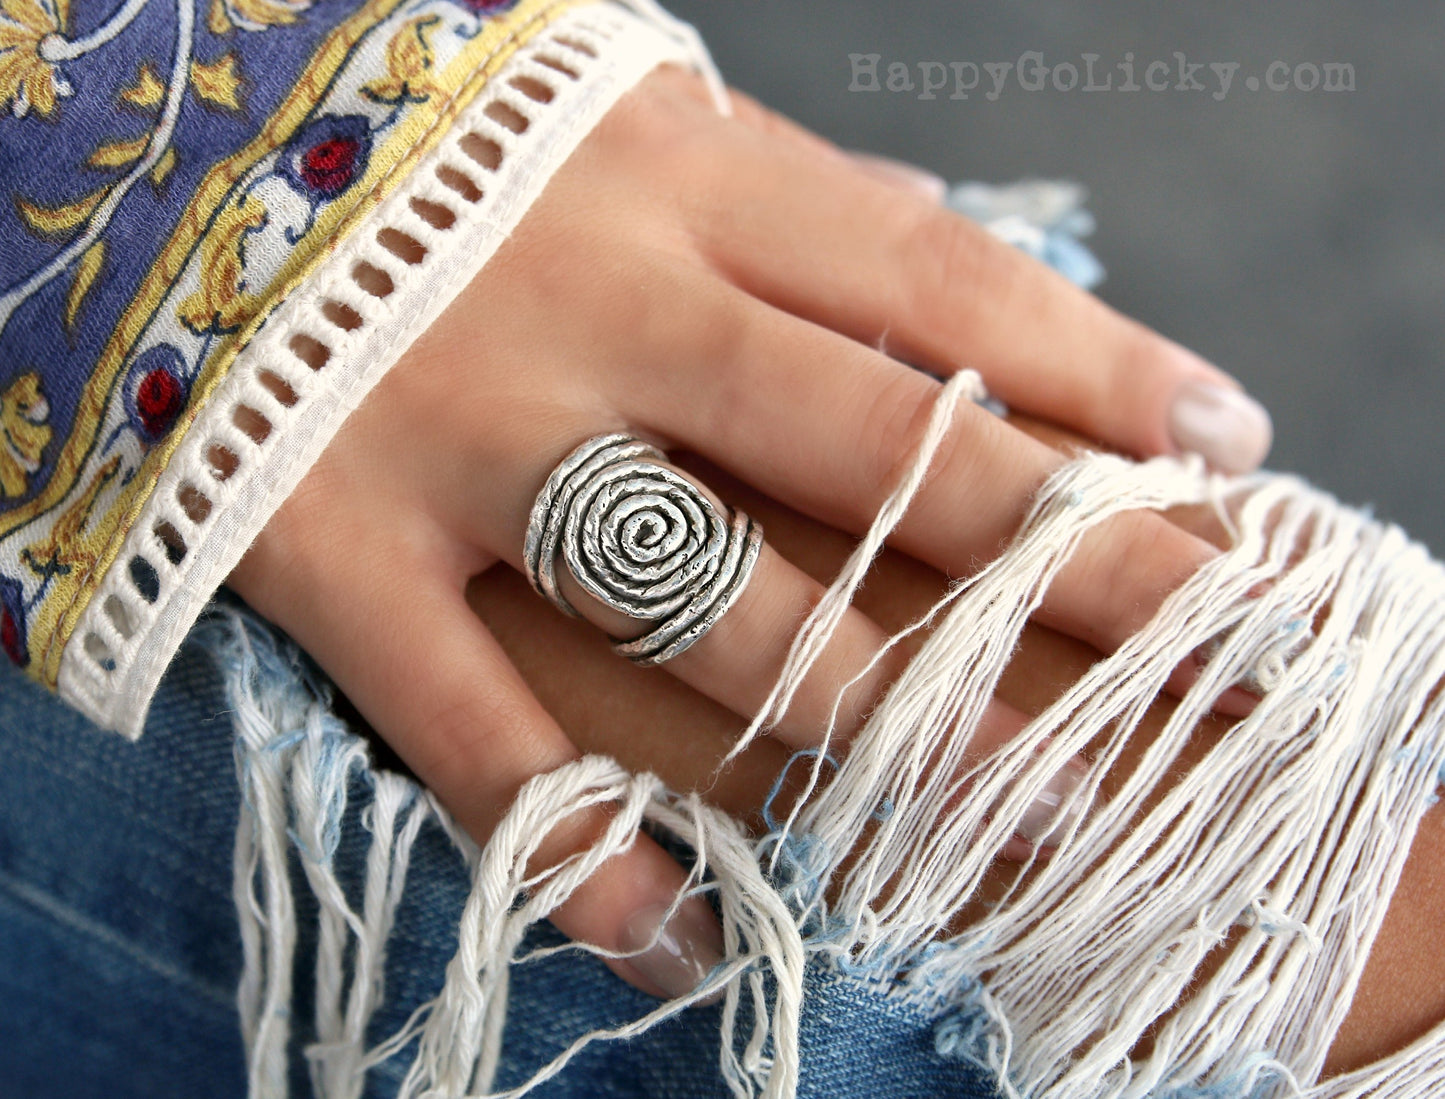 Sterling Silver Handmade Ring by HappyGoLicky Boho Jewelry